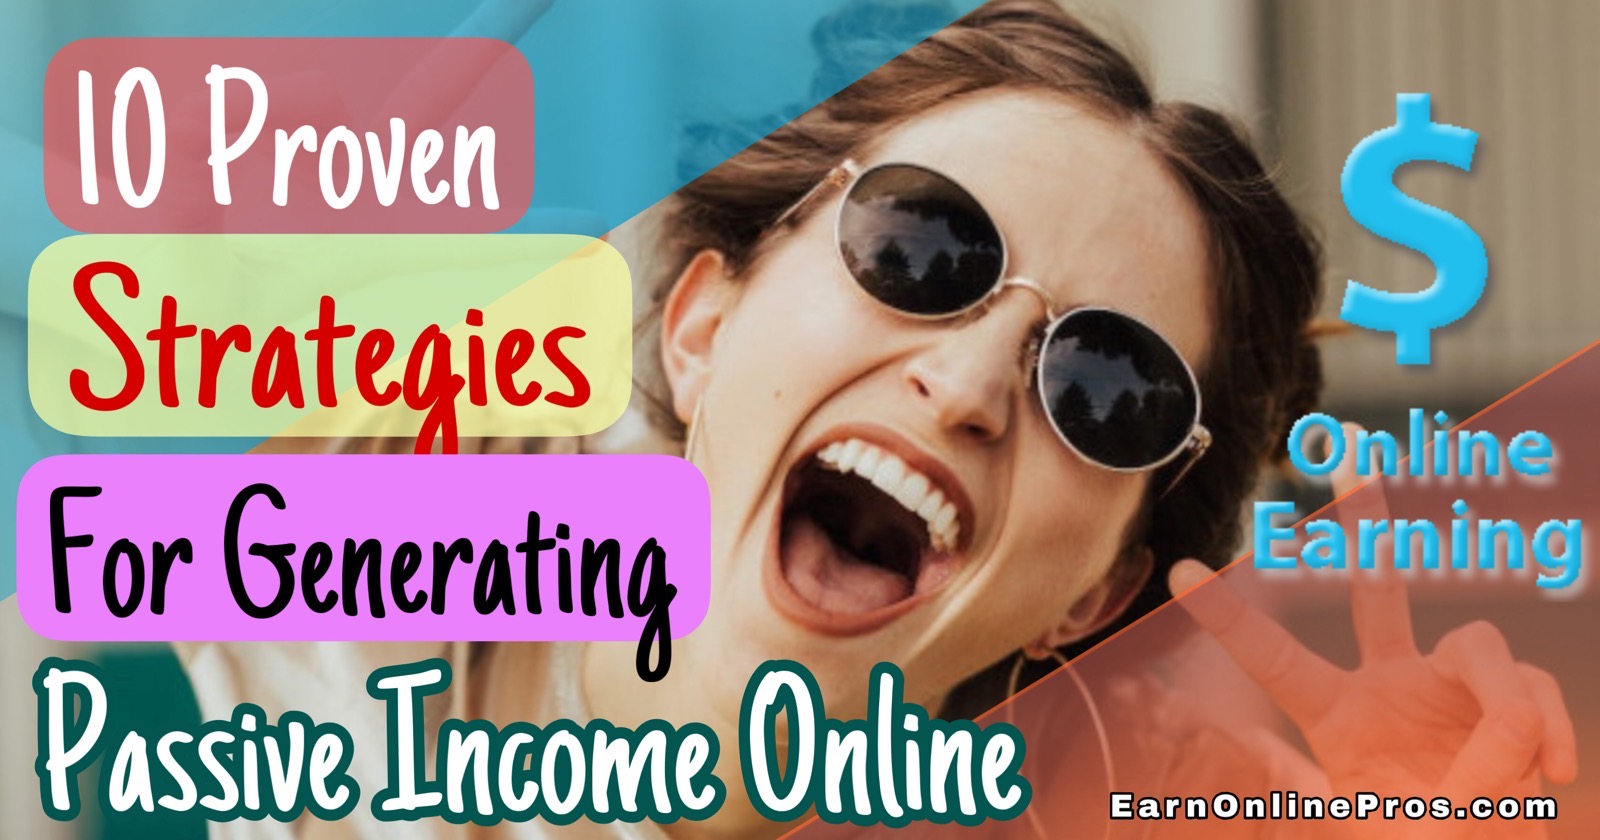 10 Proven Strategies for Generating Passive Income Online